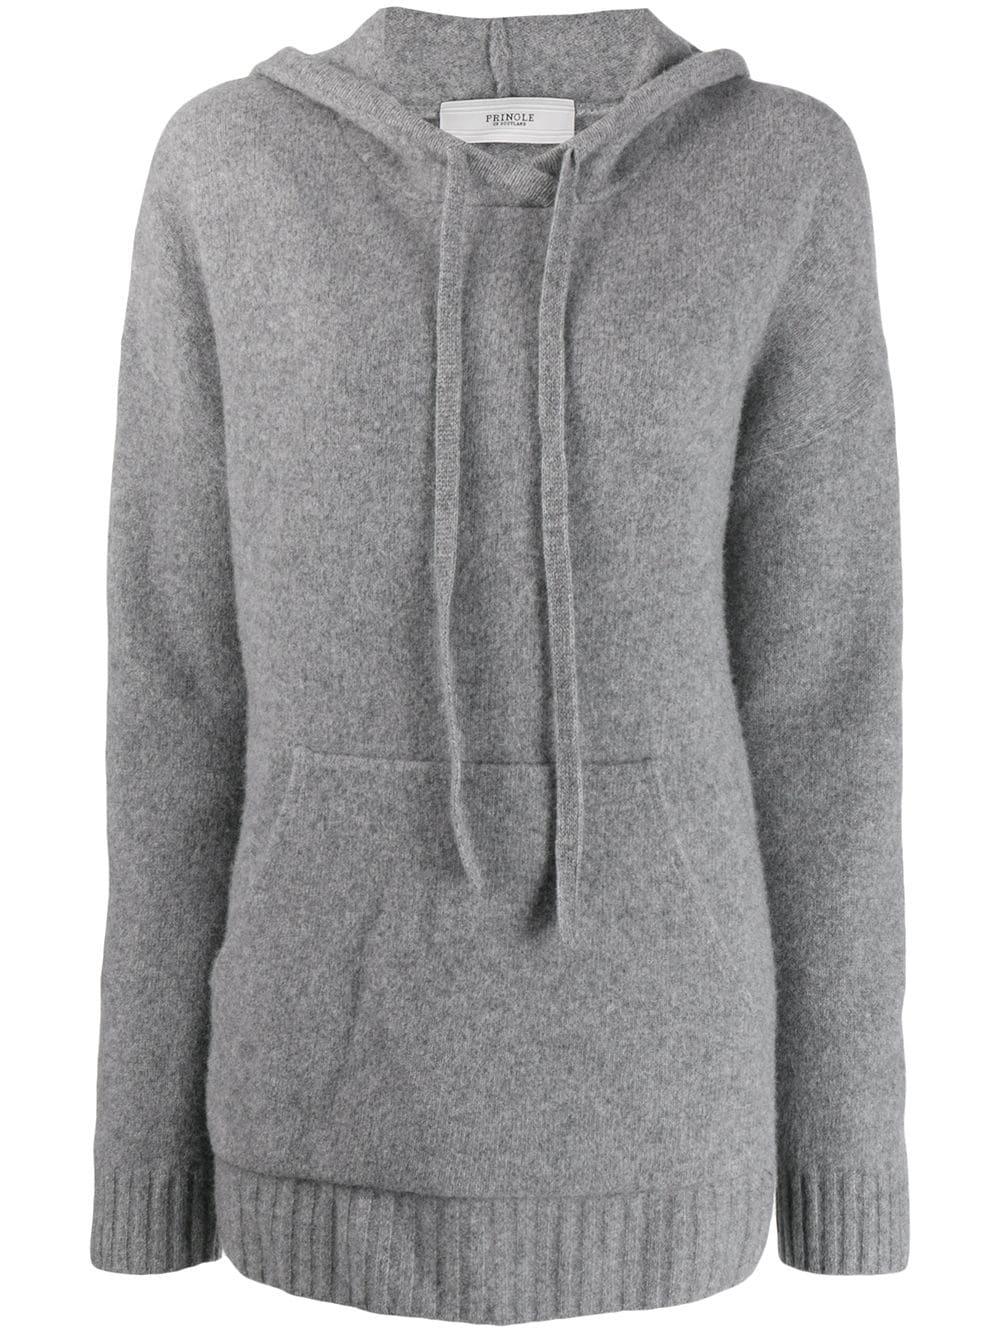 Pringle of Scotland Wool Oversized Soft Hoodie in Gray - Lyst